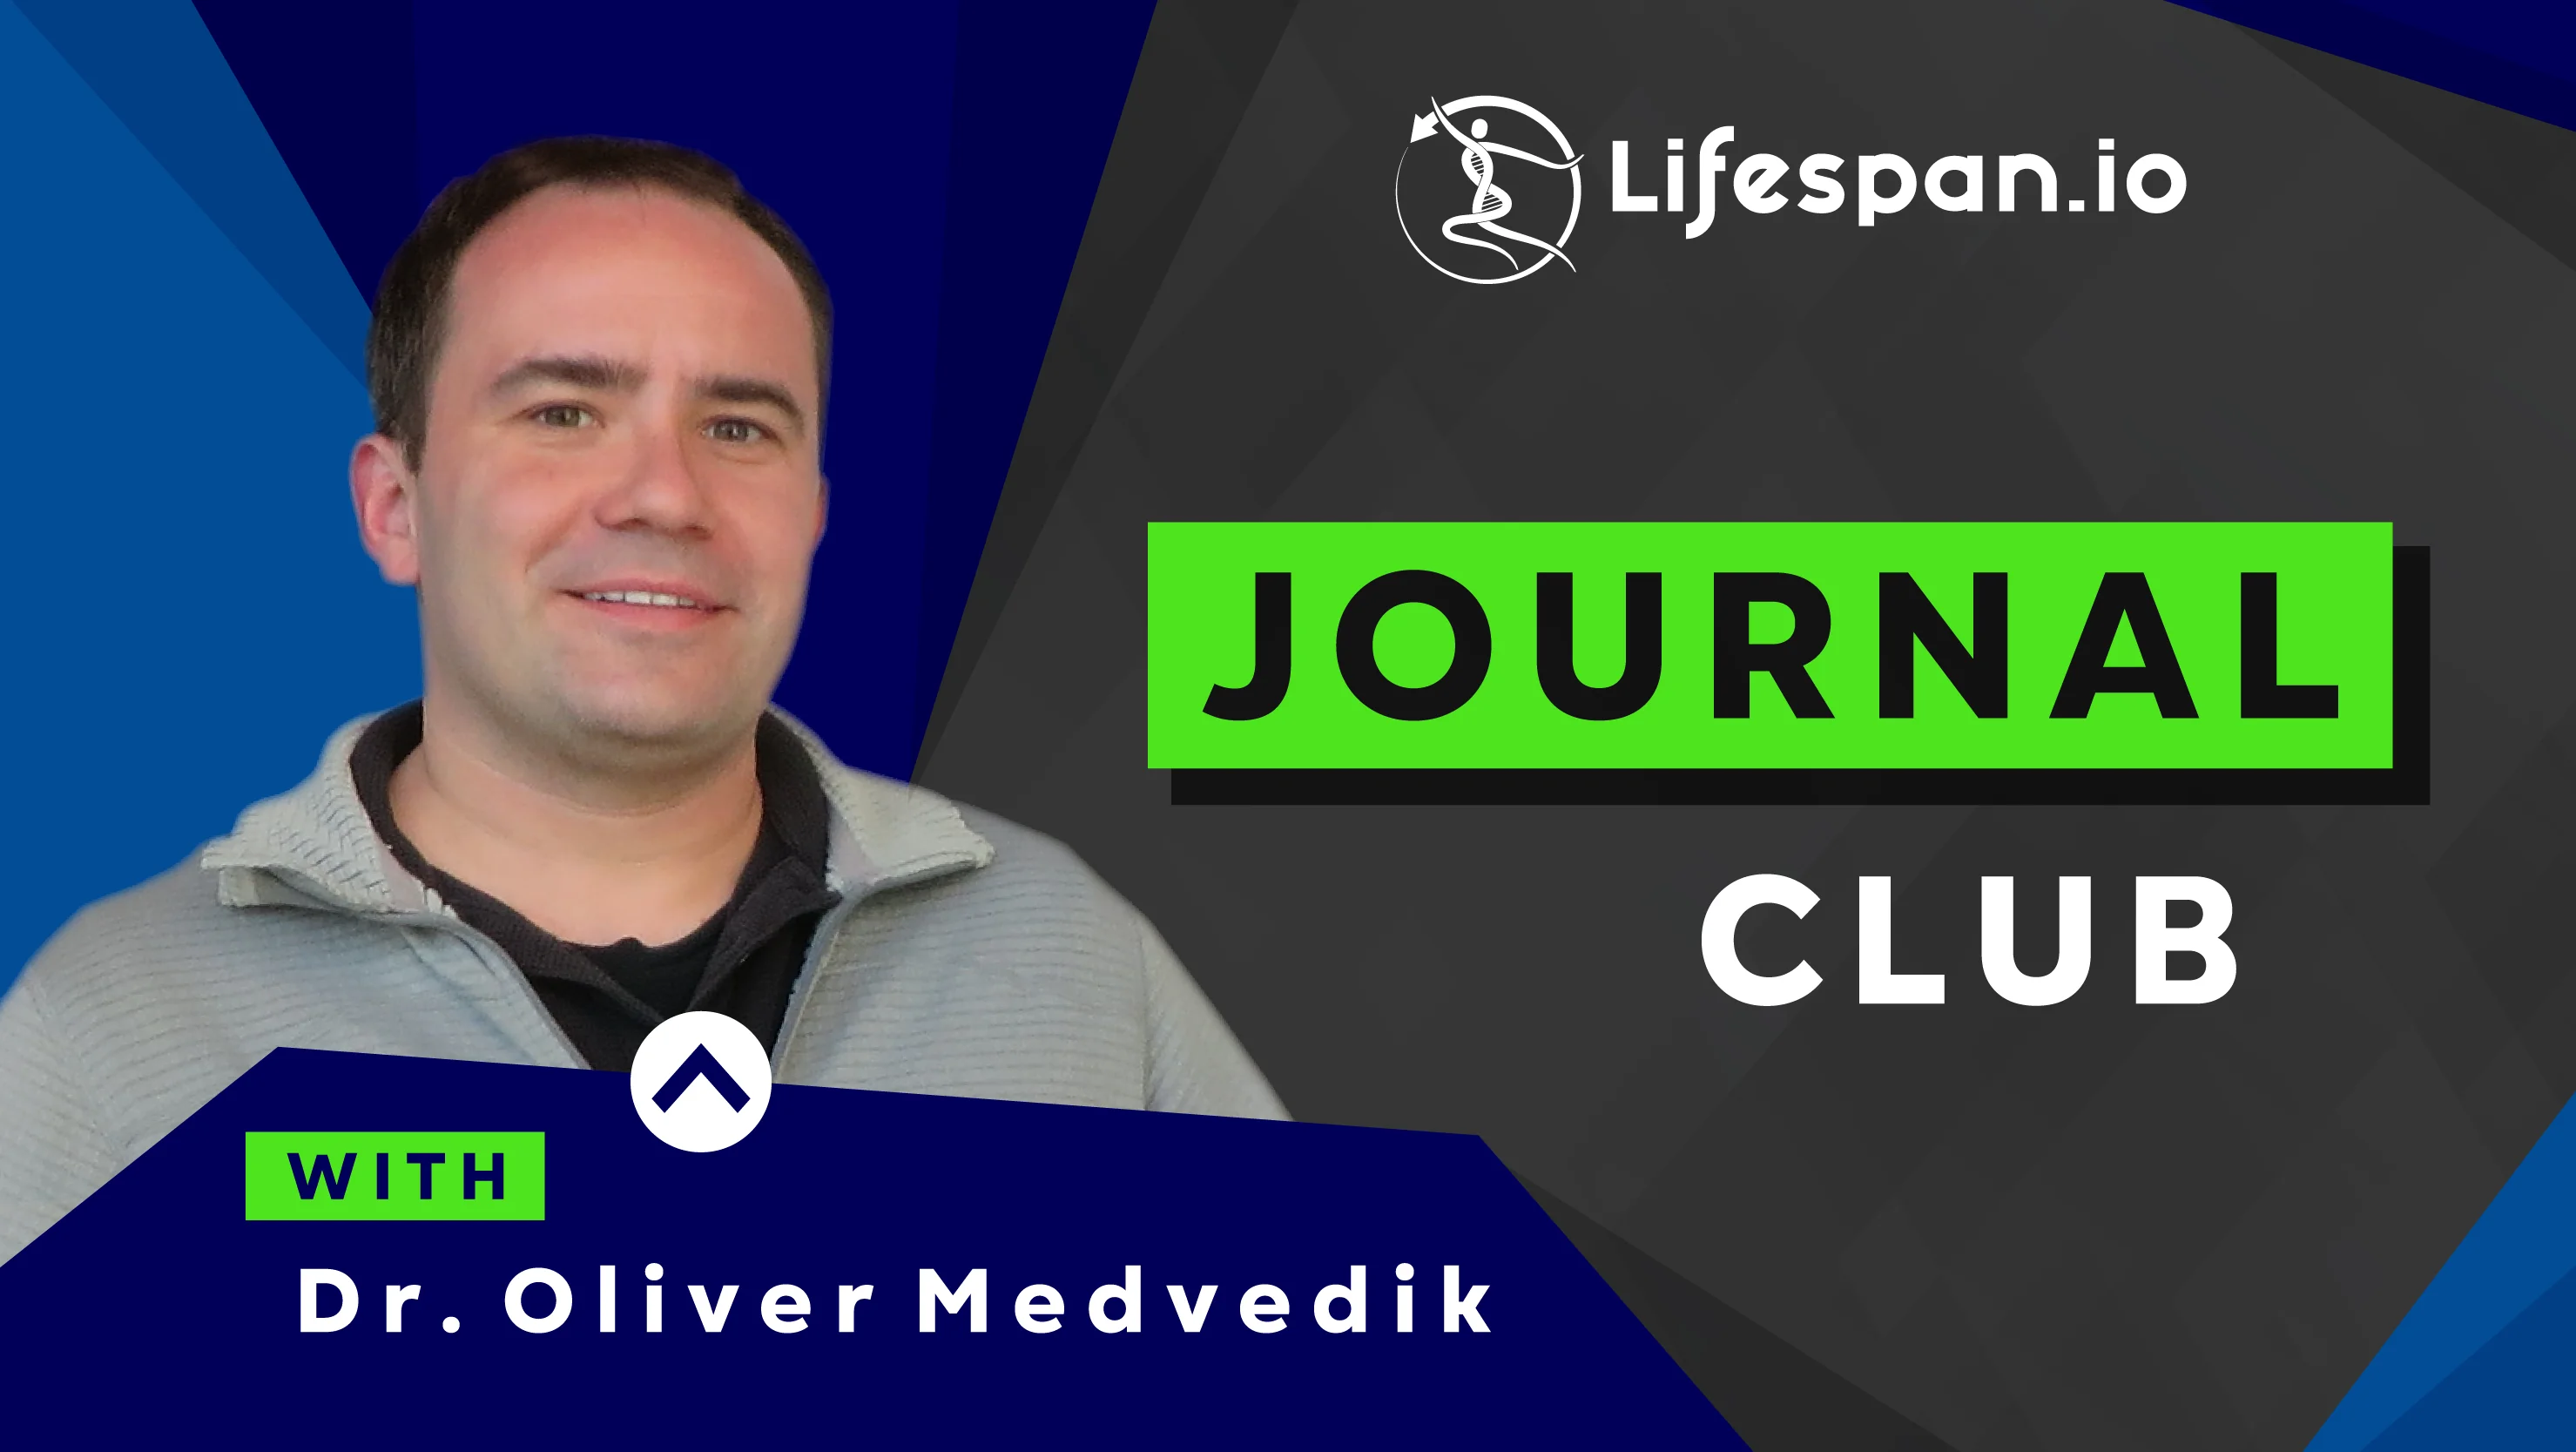 The Journal Club is a monthly livestream hosted by Dr. Oliver Medvedik which covers the latest aging research papers.